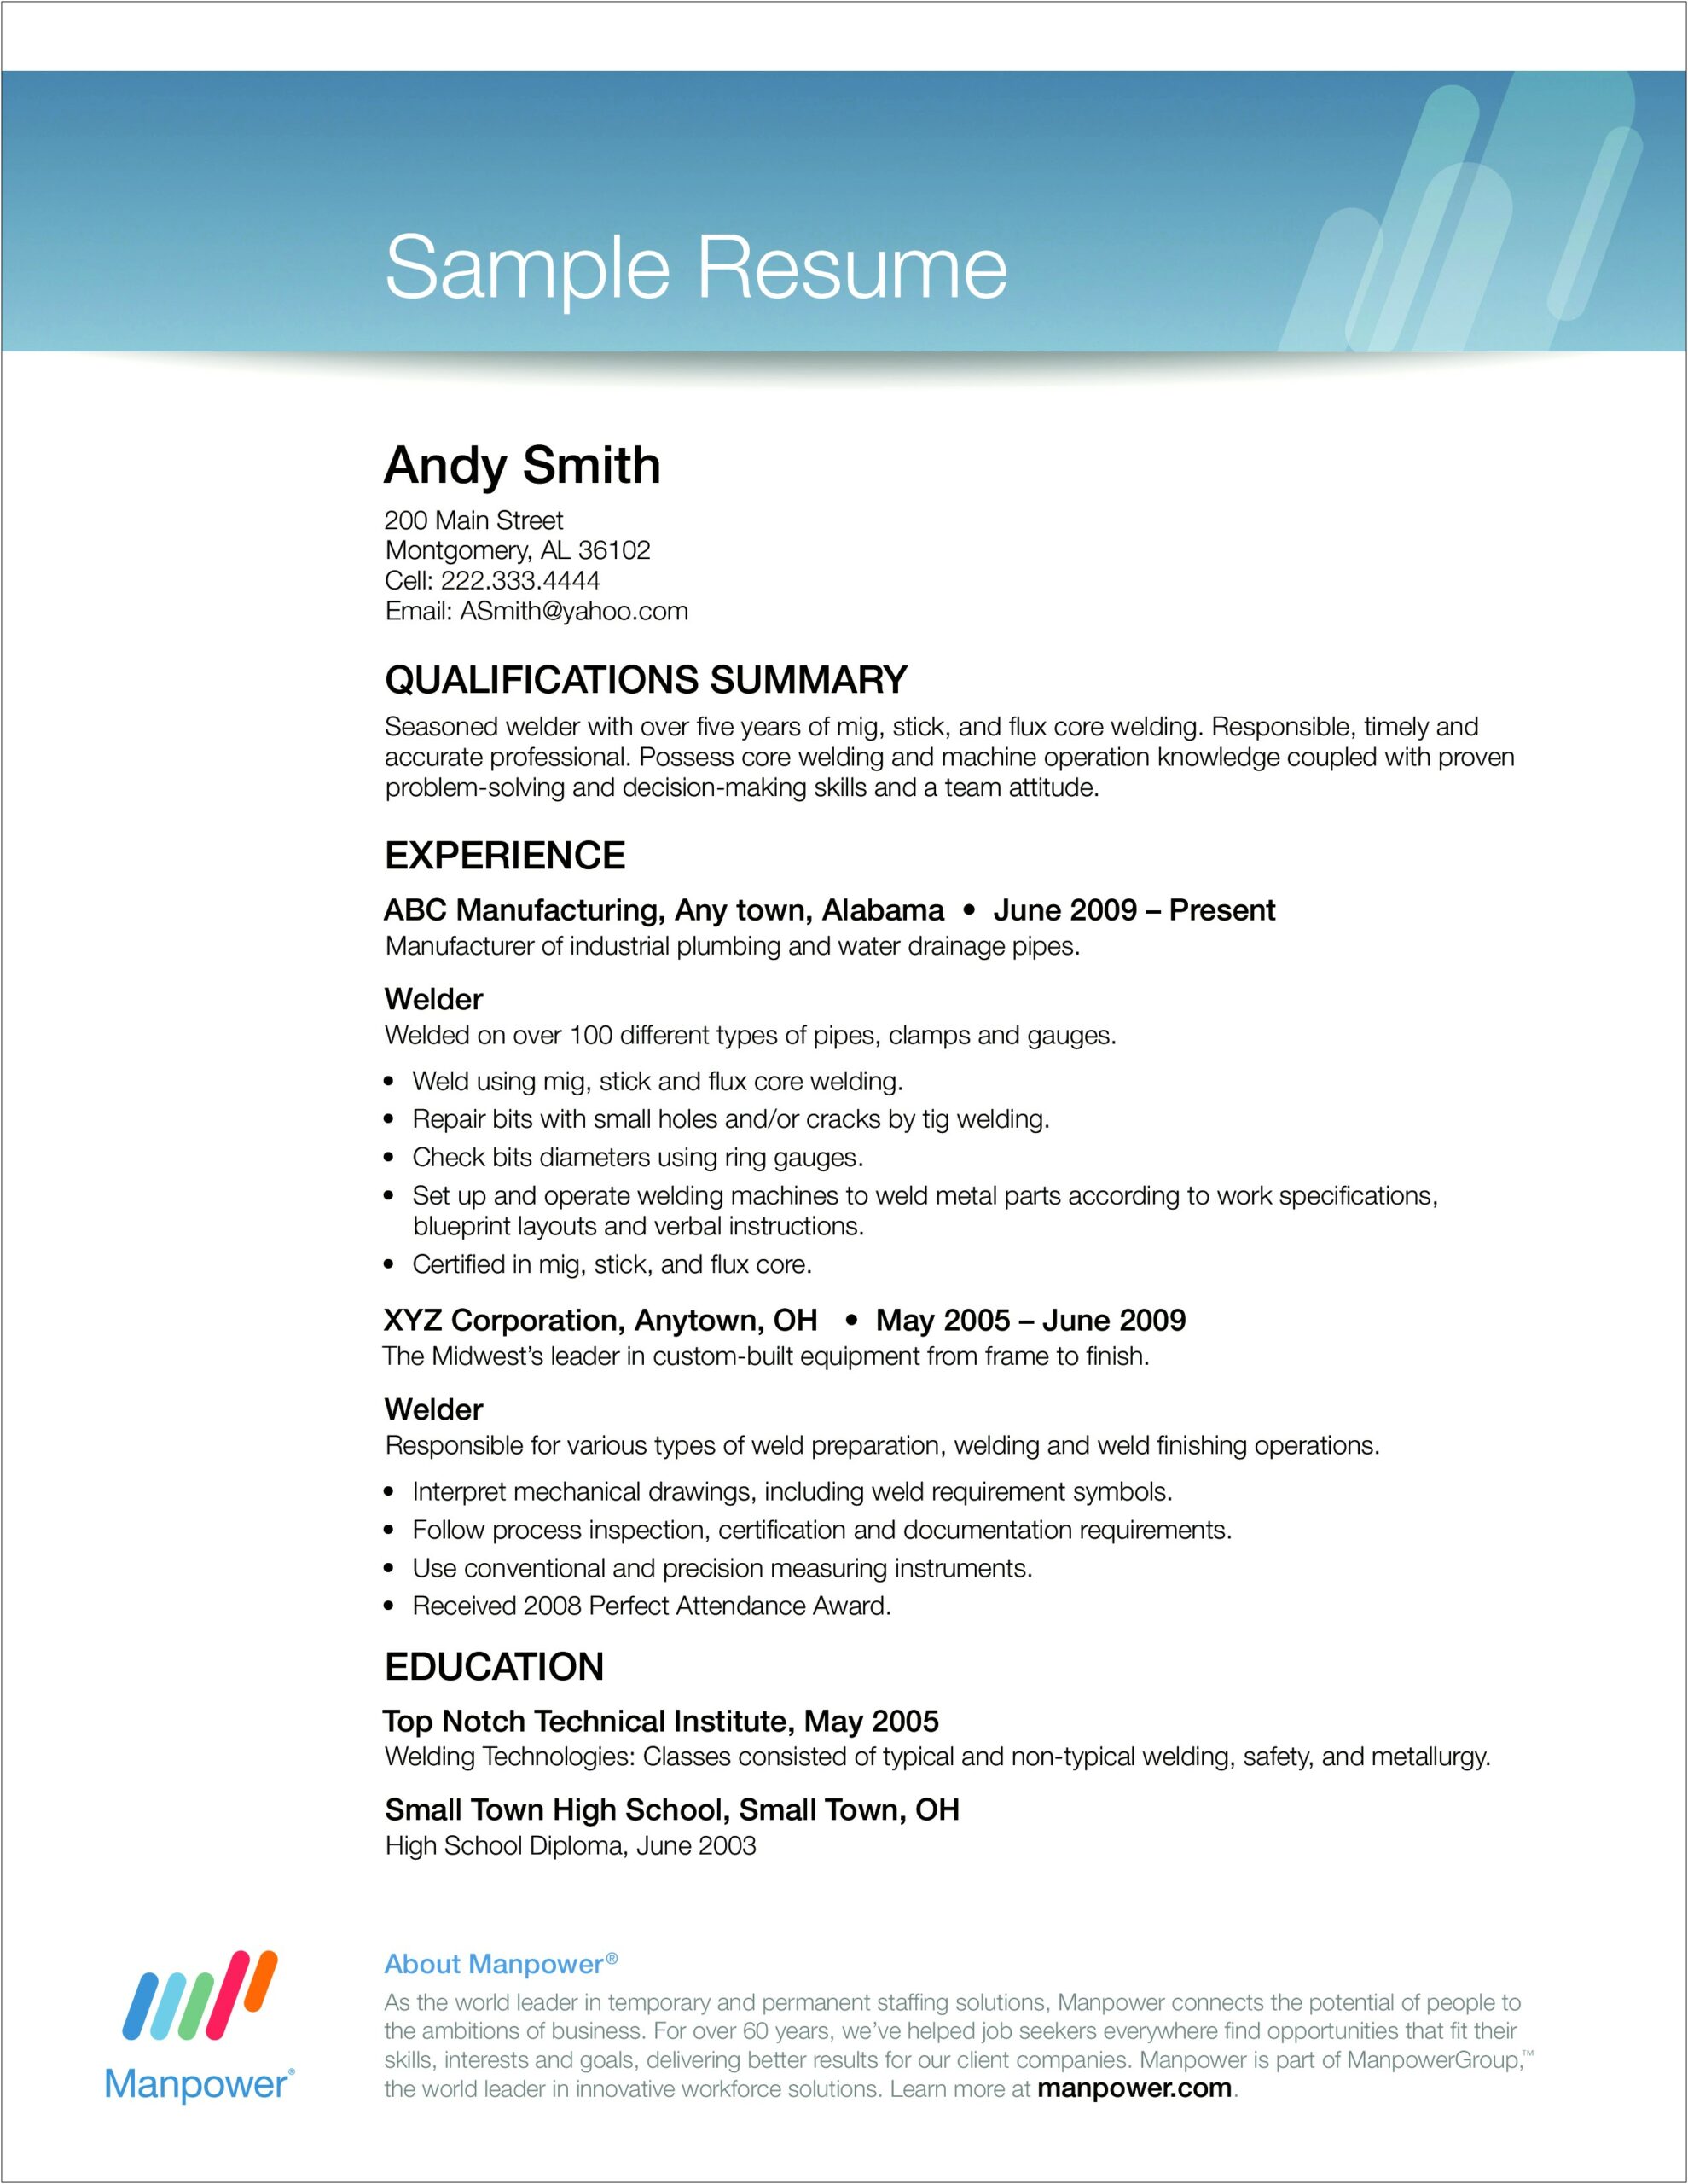 Example Of Resume For Welding